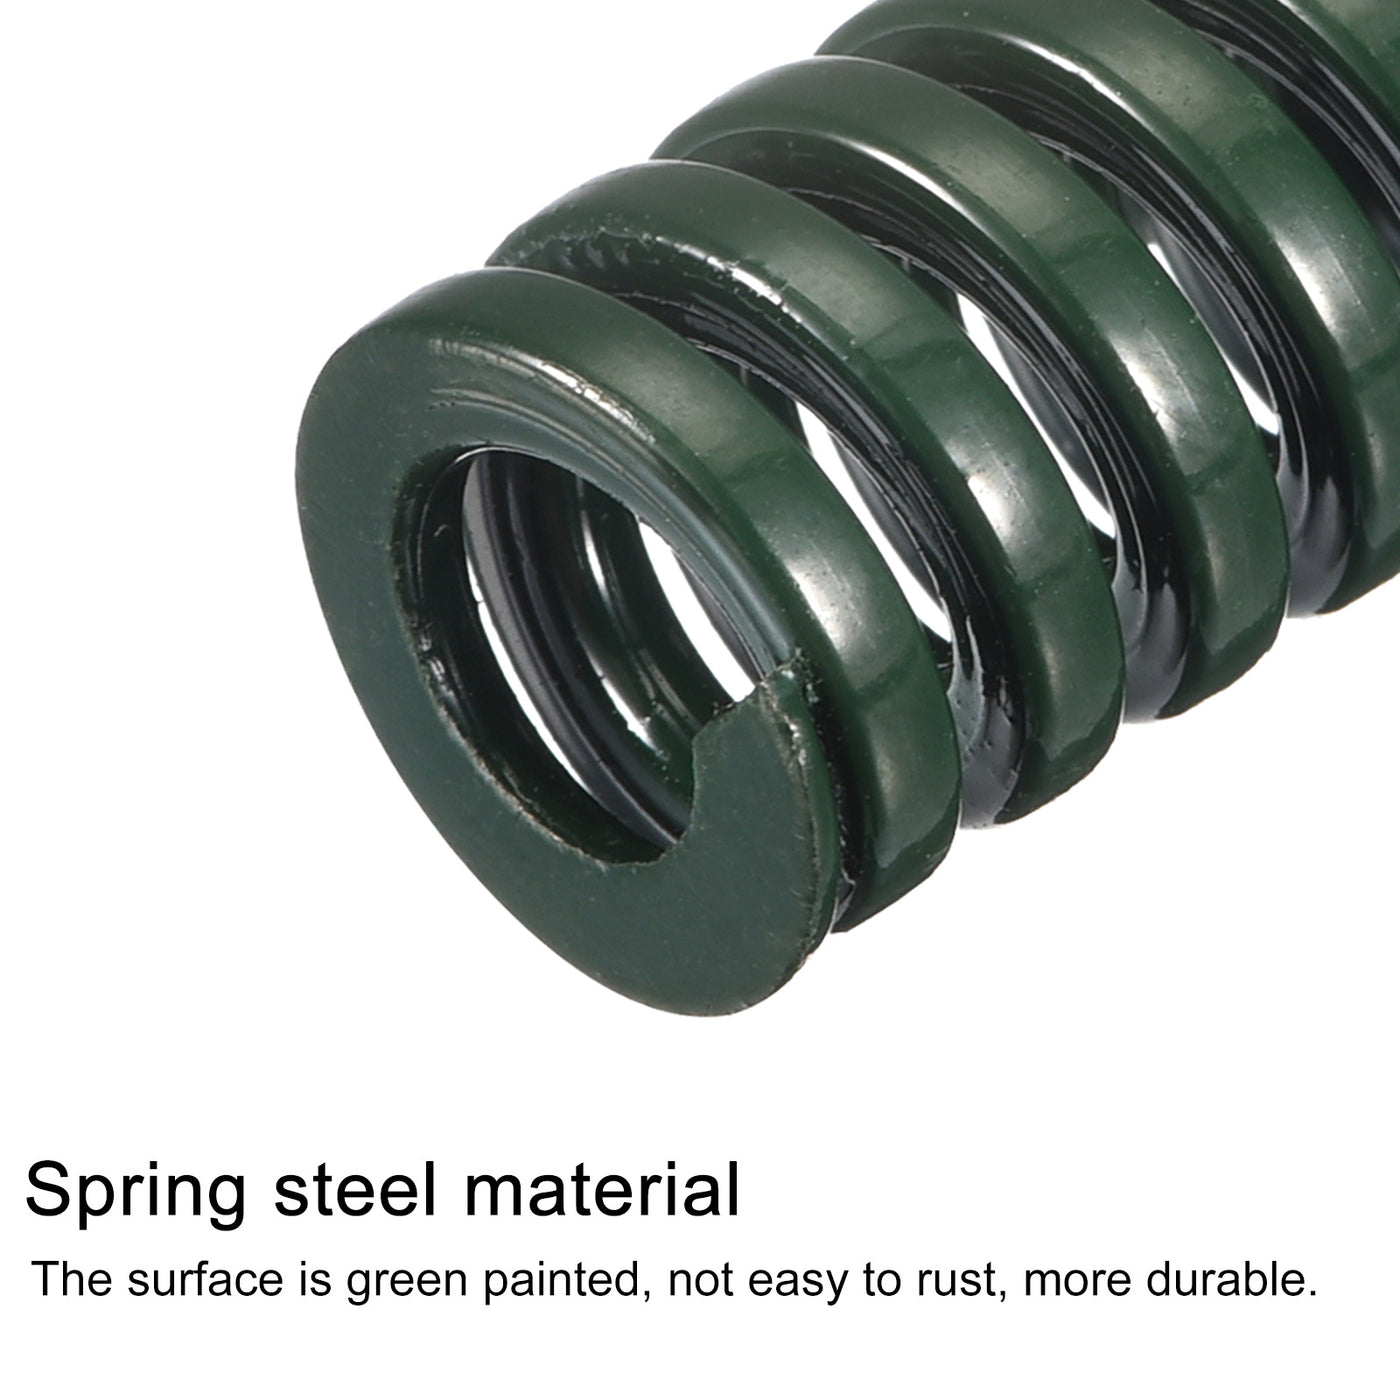 uxcell Uxcell 3D Printer Die Spring, 2pcs 14mm OD 100mm Long Spiral Stamping Compression Green